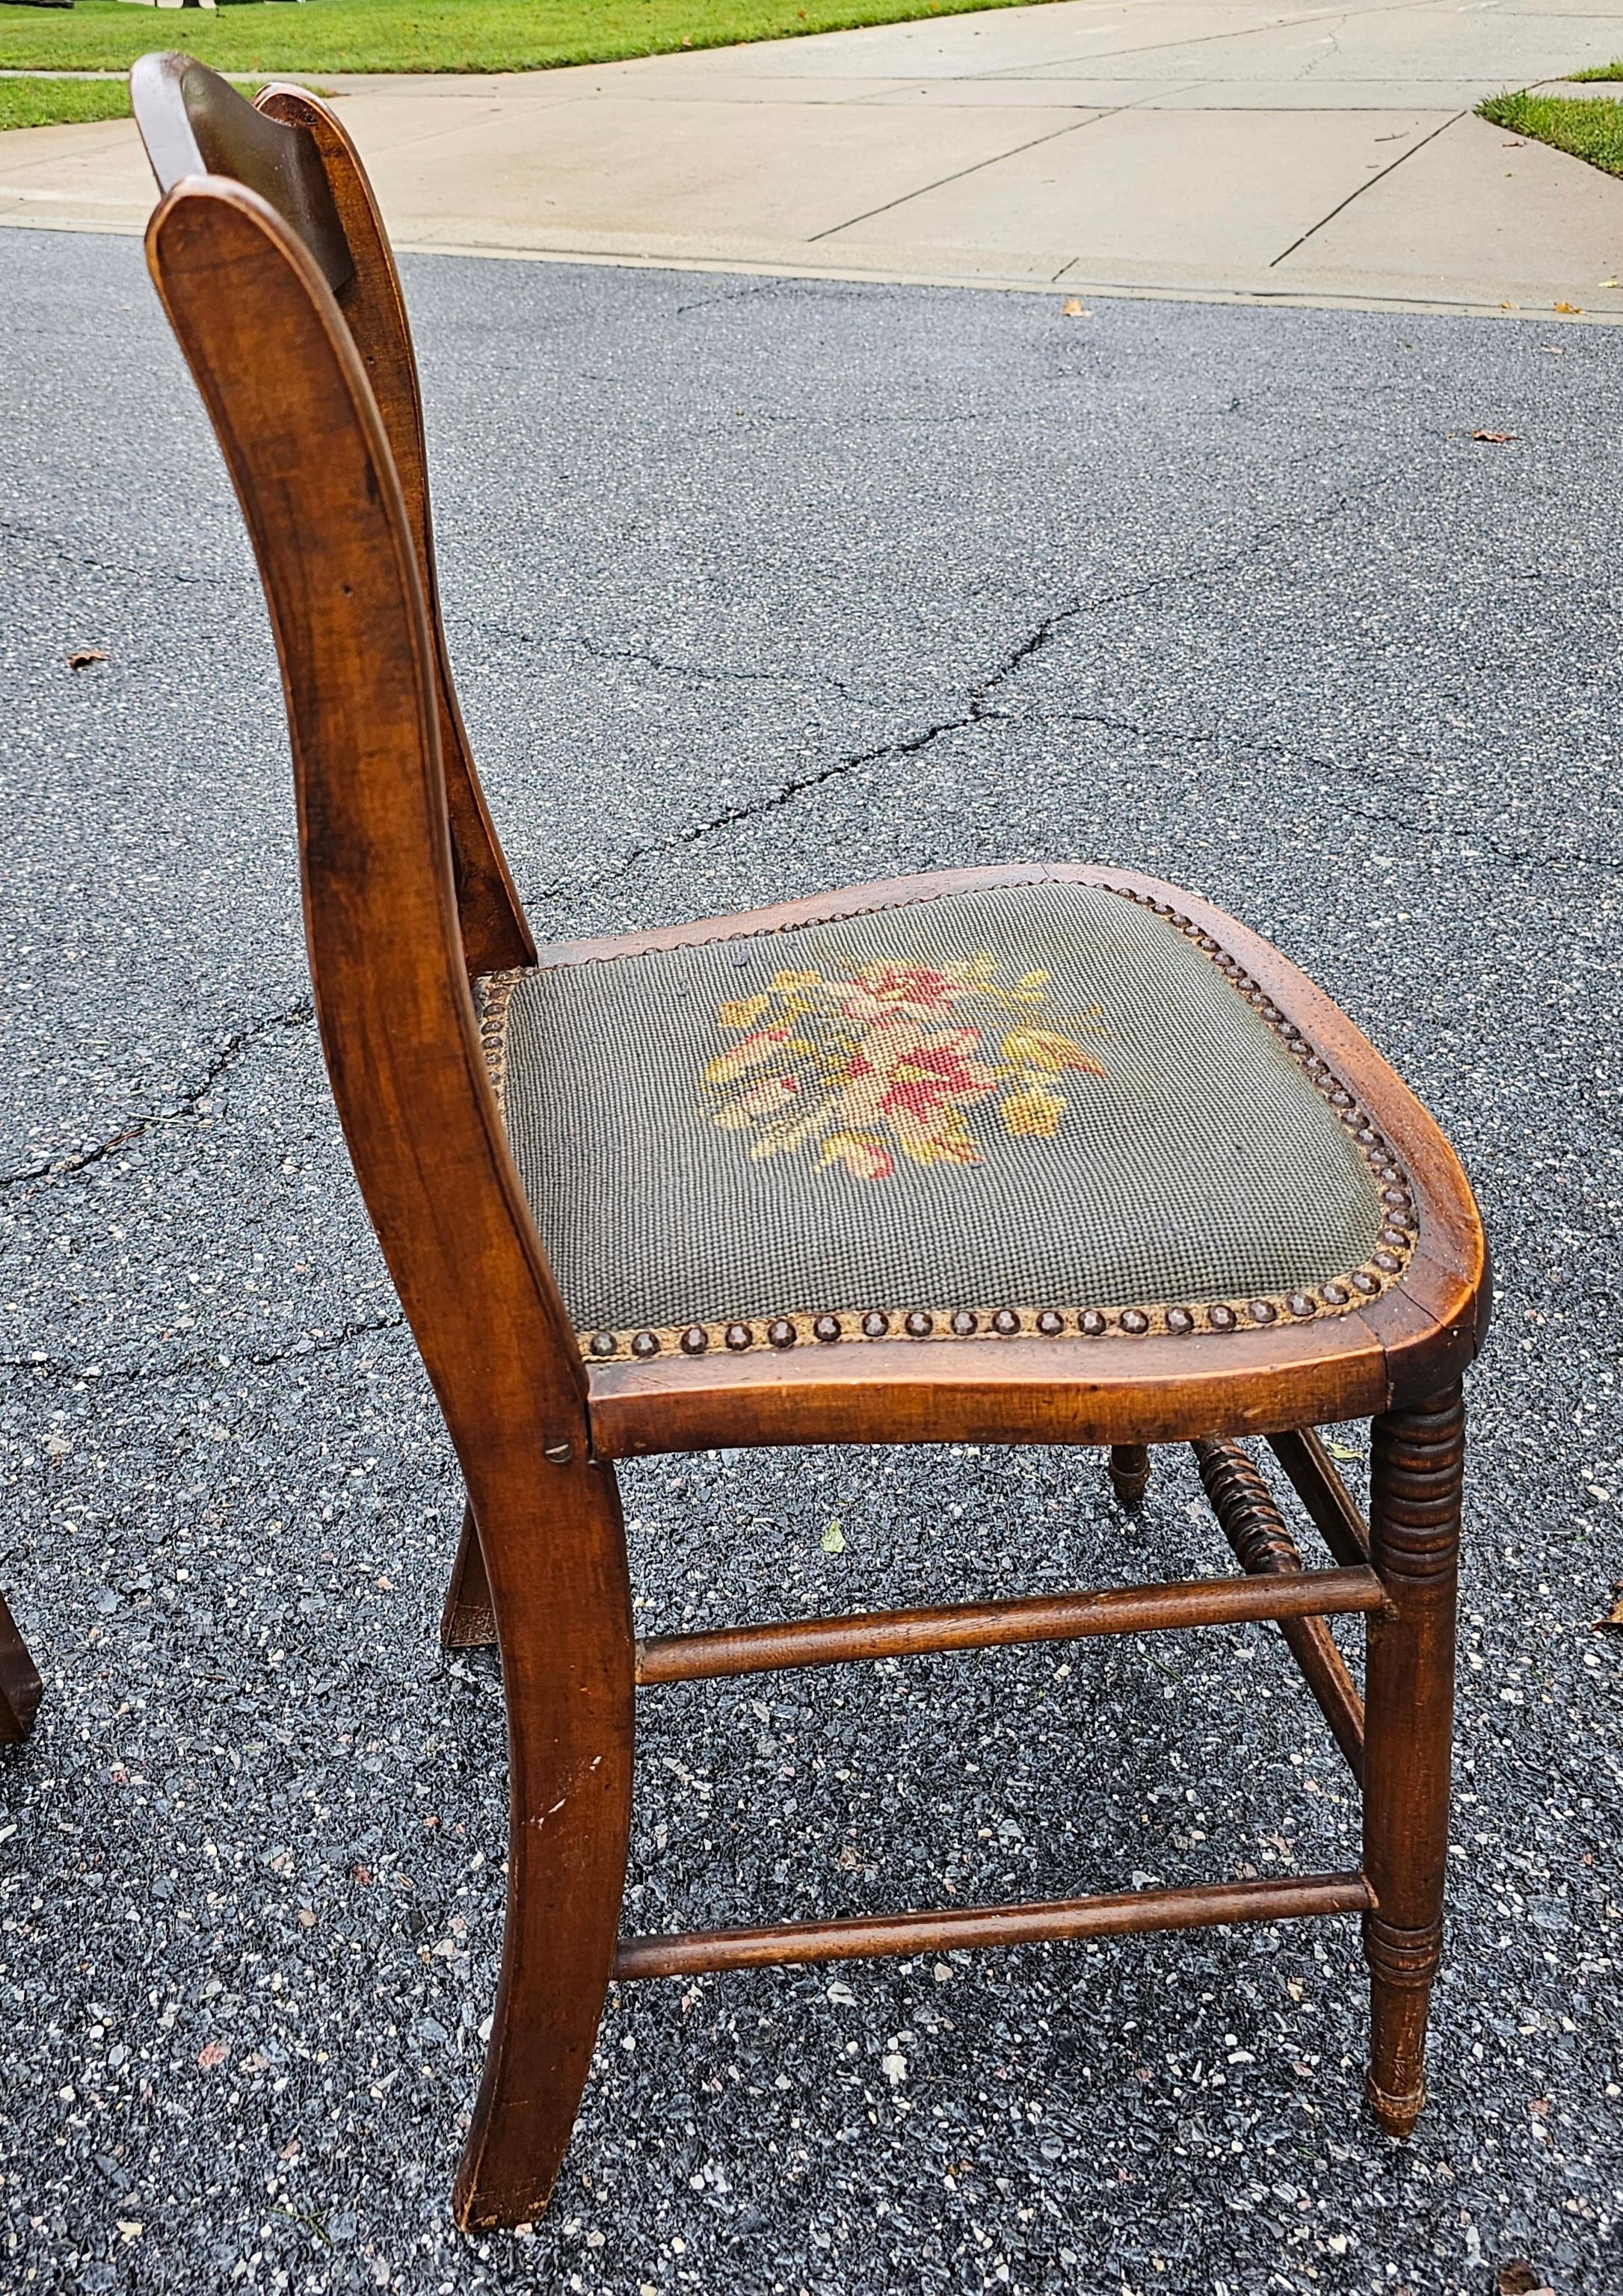 19th Century American Walnut and Needlepoint Upholstered Seat Side Chairs, Pair For Sale 2